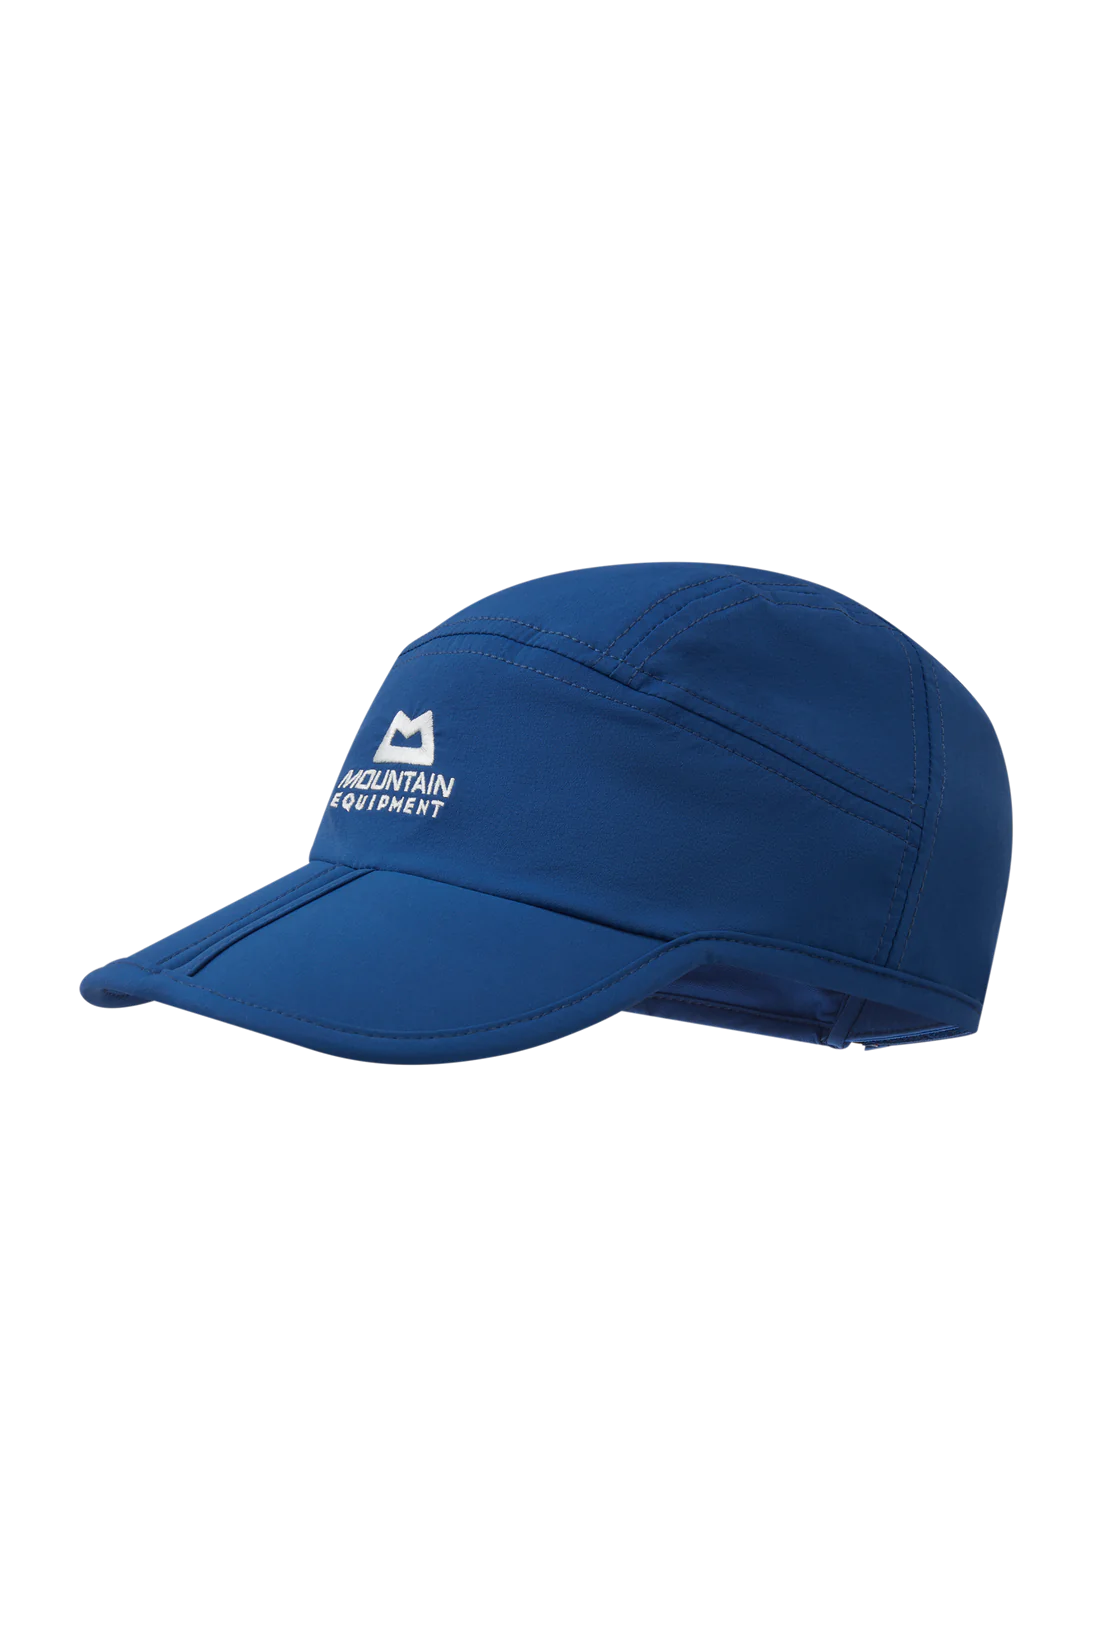 Mountain Equipment Squall Cap | Mountain Equipment | Portwest - The Outdoor Shop